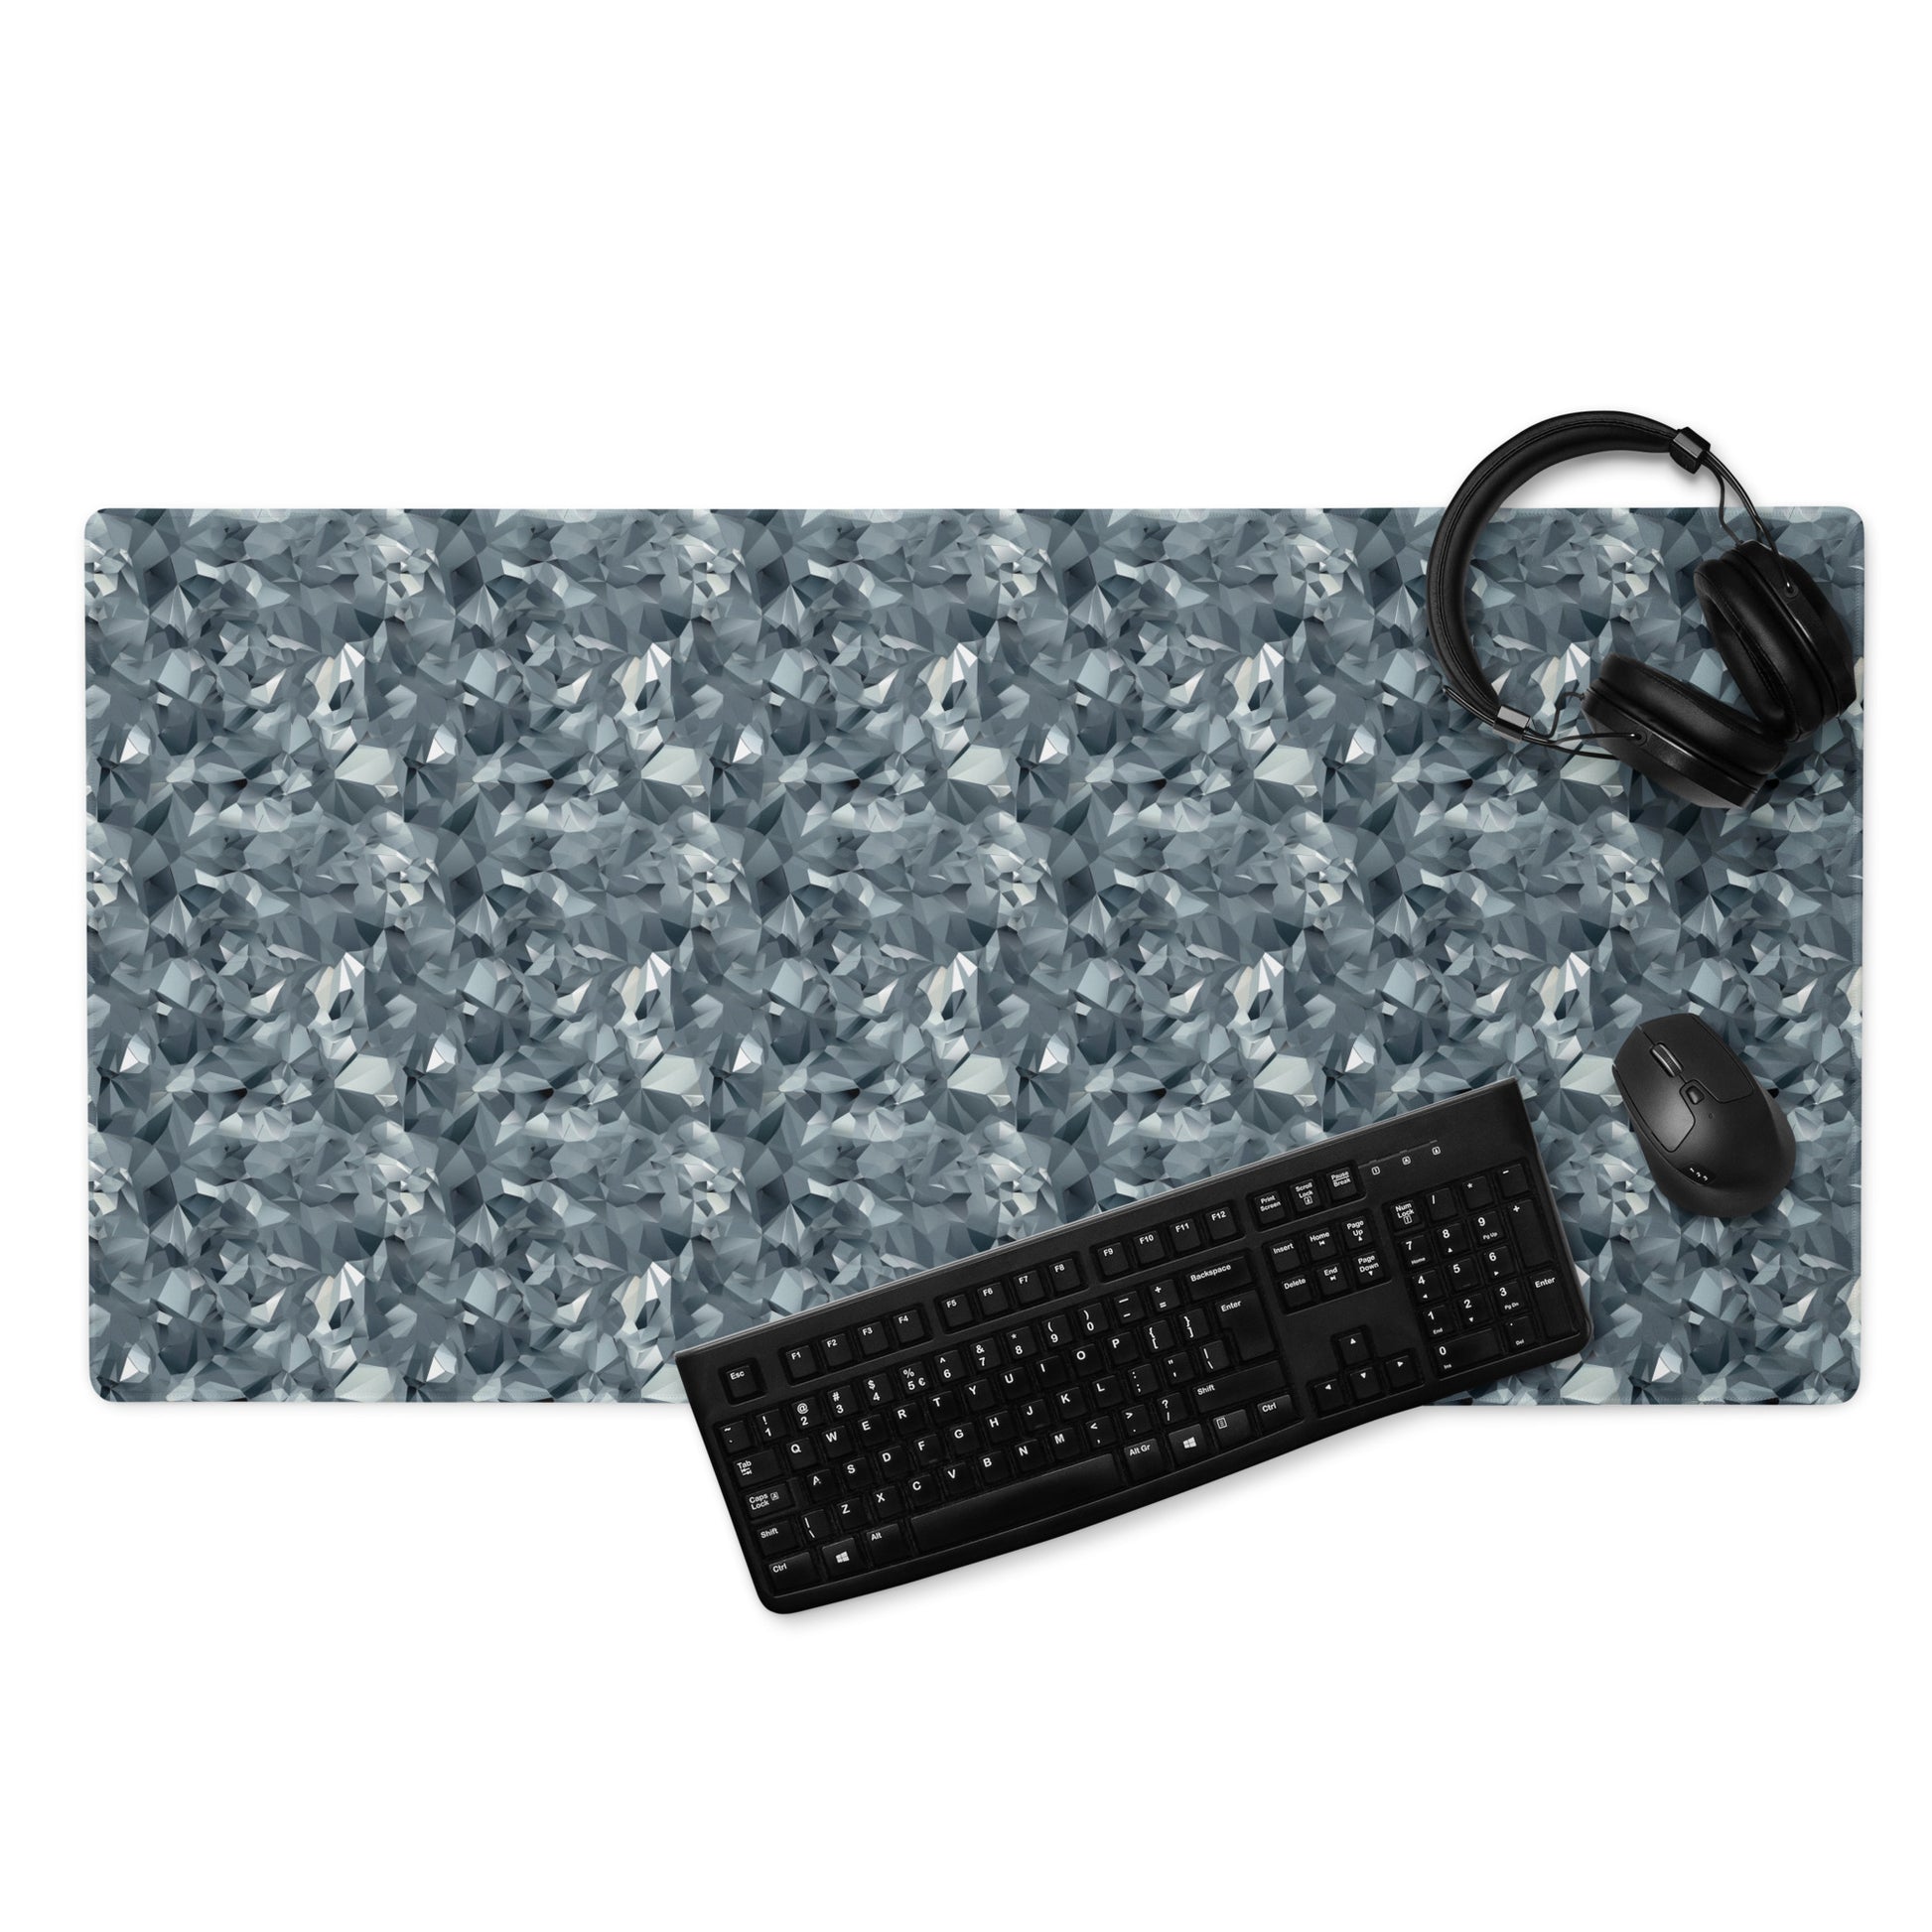 A 36" x 18" gaming desk pad with gray crystals. A keyboard, mouse, and headphones sit on it.